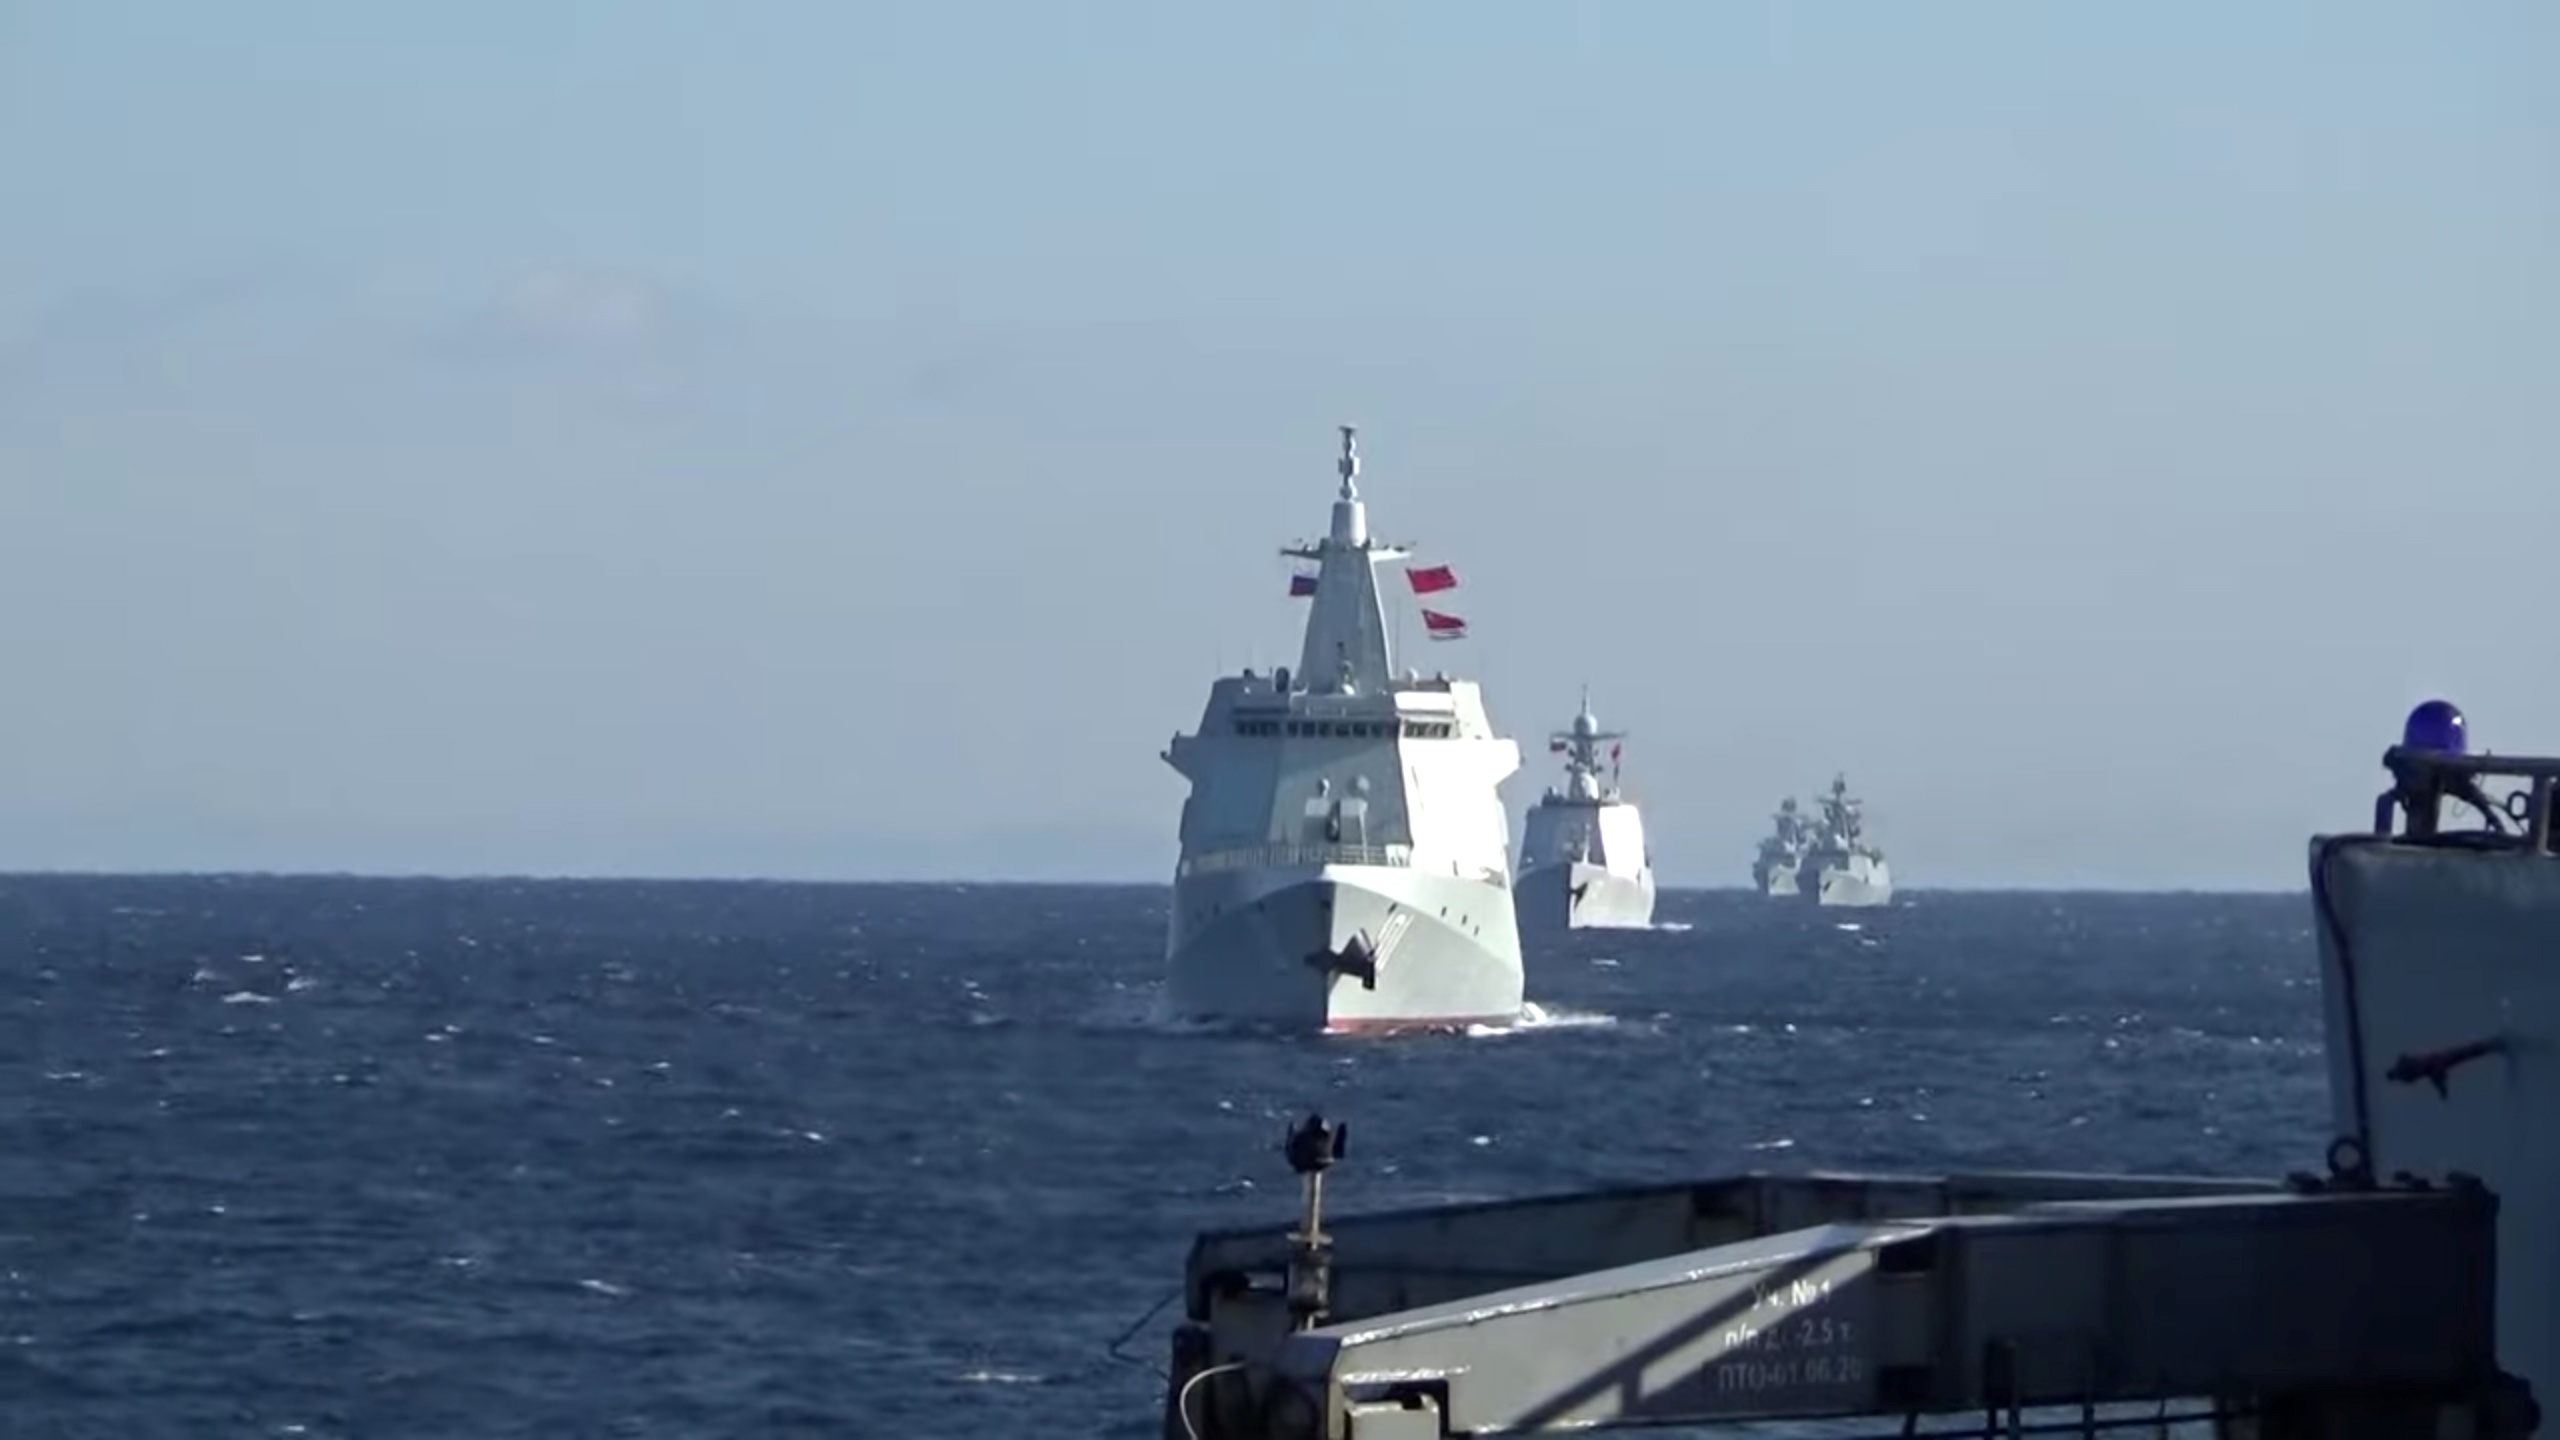 Russian and Chinese naval vessels conduct a maritime patrol in the Pacific Ocean